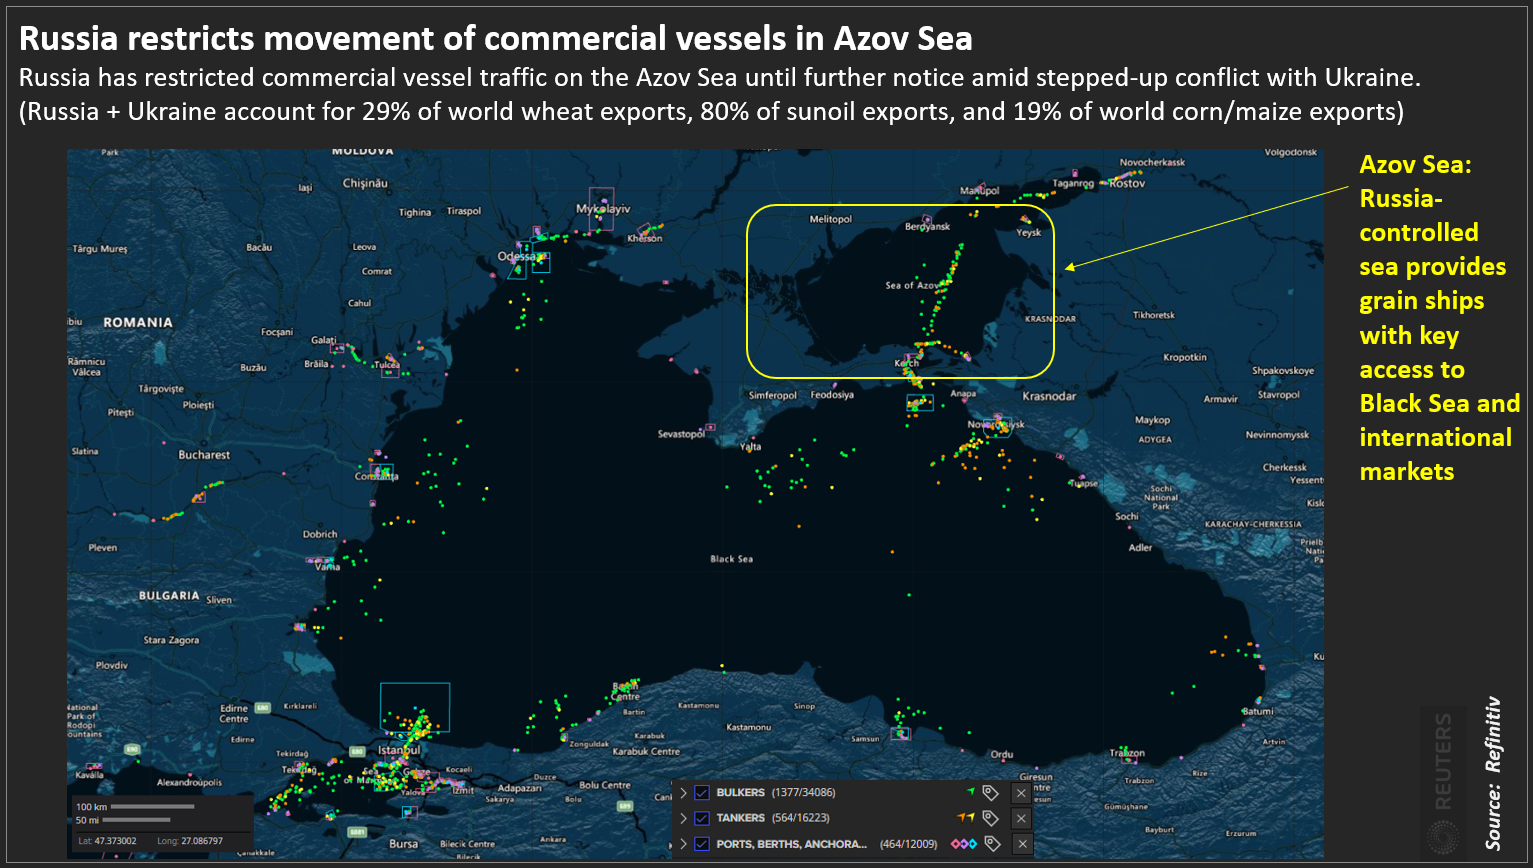 Russia restricts movement of commercial vessels in Azov Sea